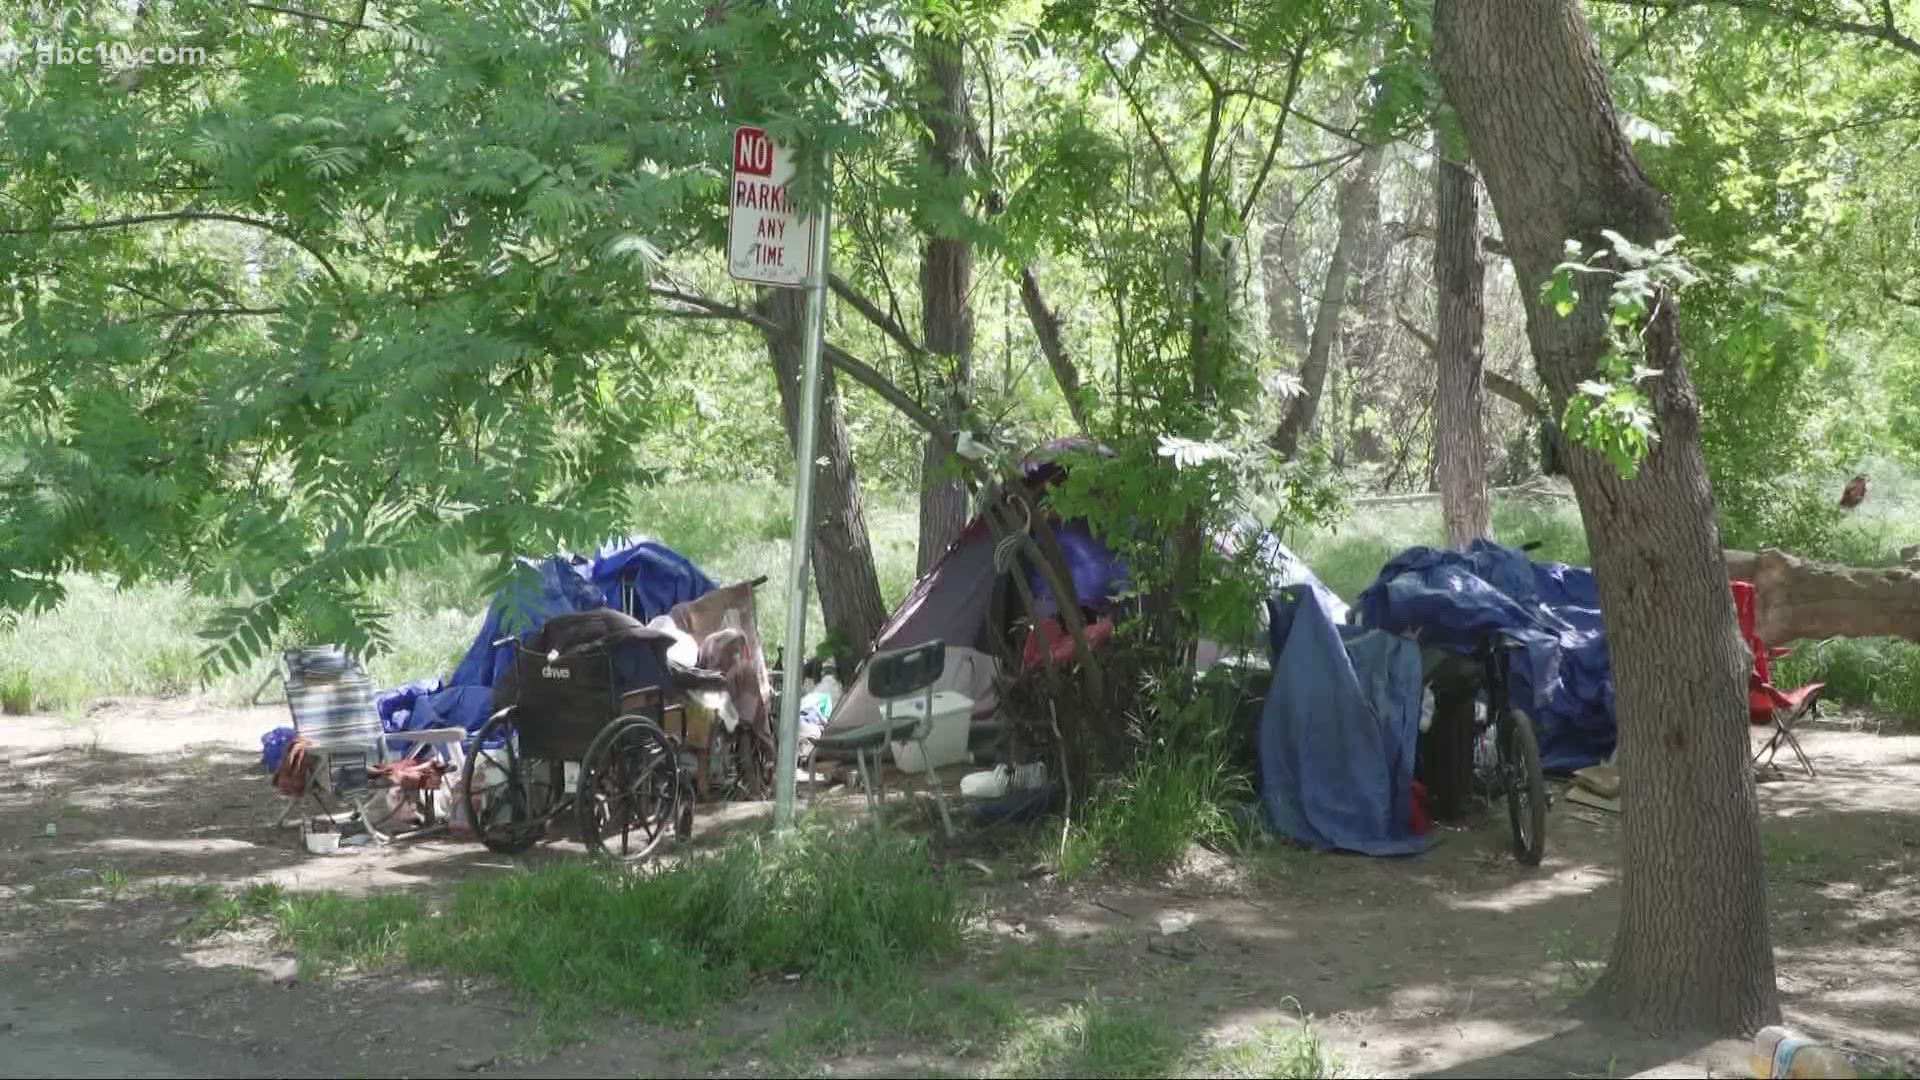 After a woman was found dead near the bike trail, people living in the nearby encampment feel less safe, hoping the same thing doesn't happen to them.